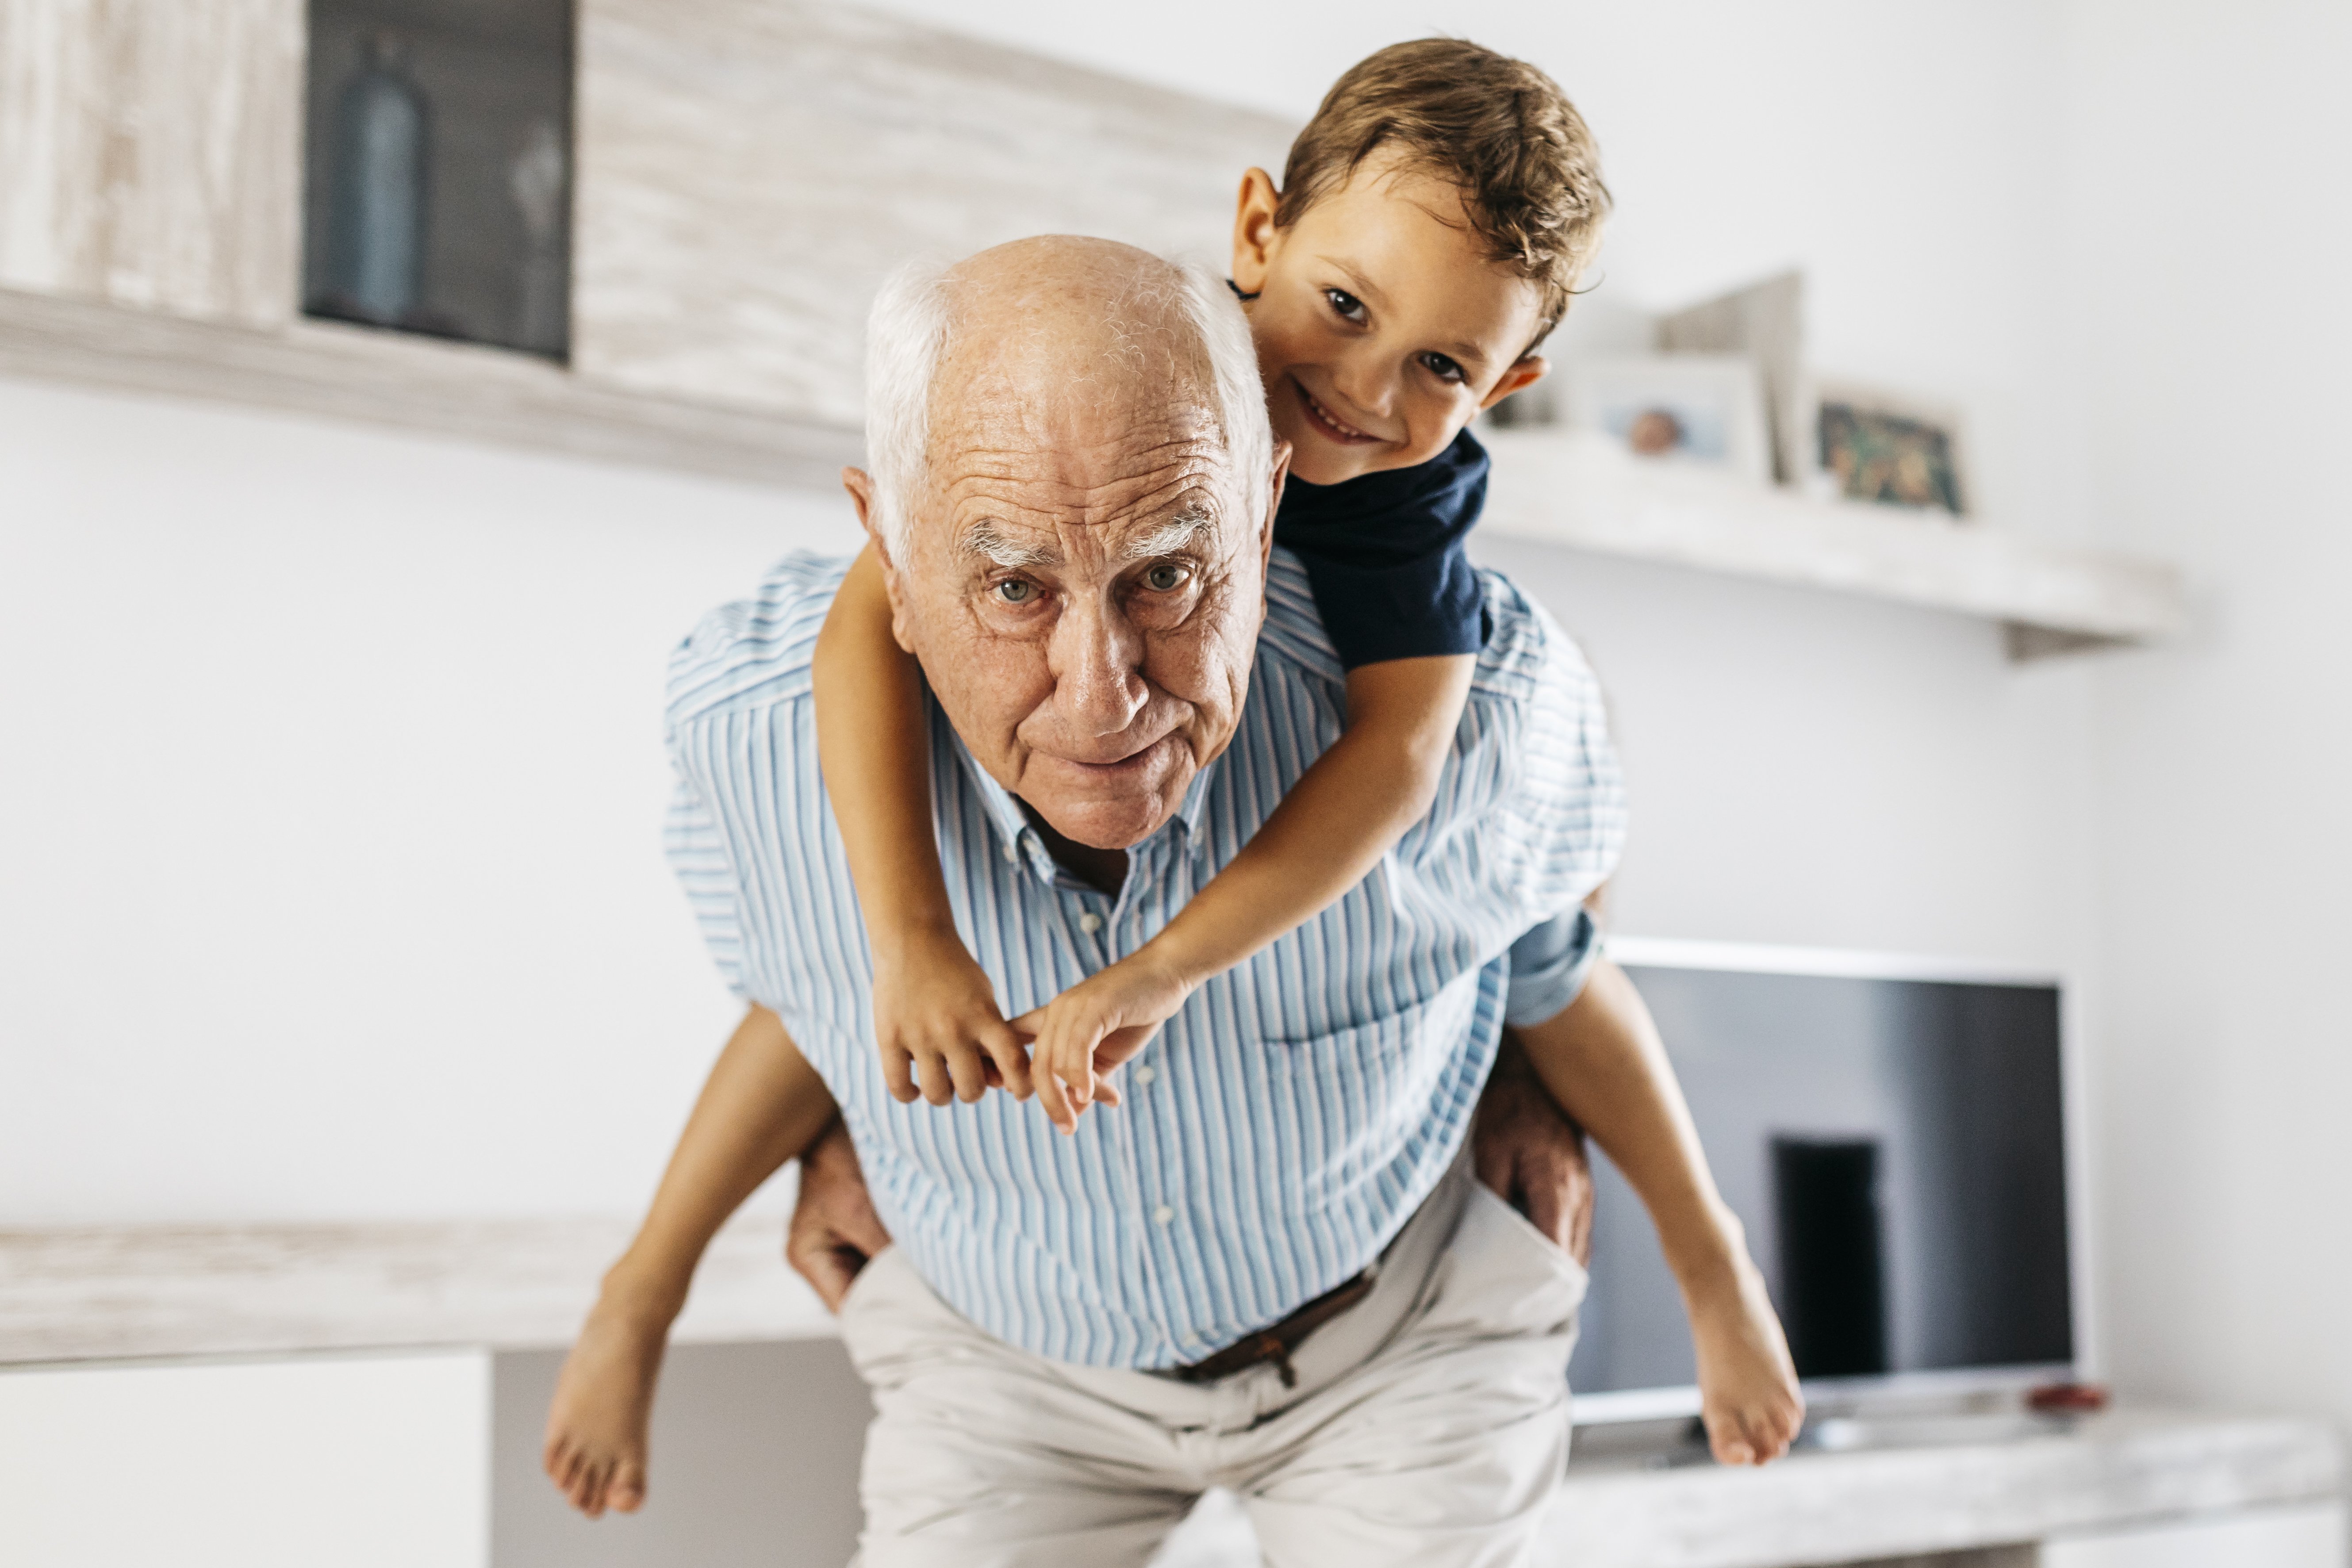 Portrait of grandfather giving his grandson a piggyback ride in the living room | Photo: Getty Images